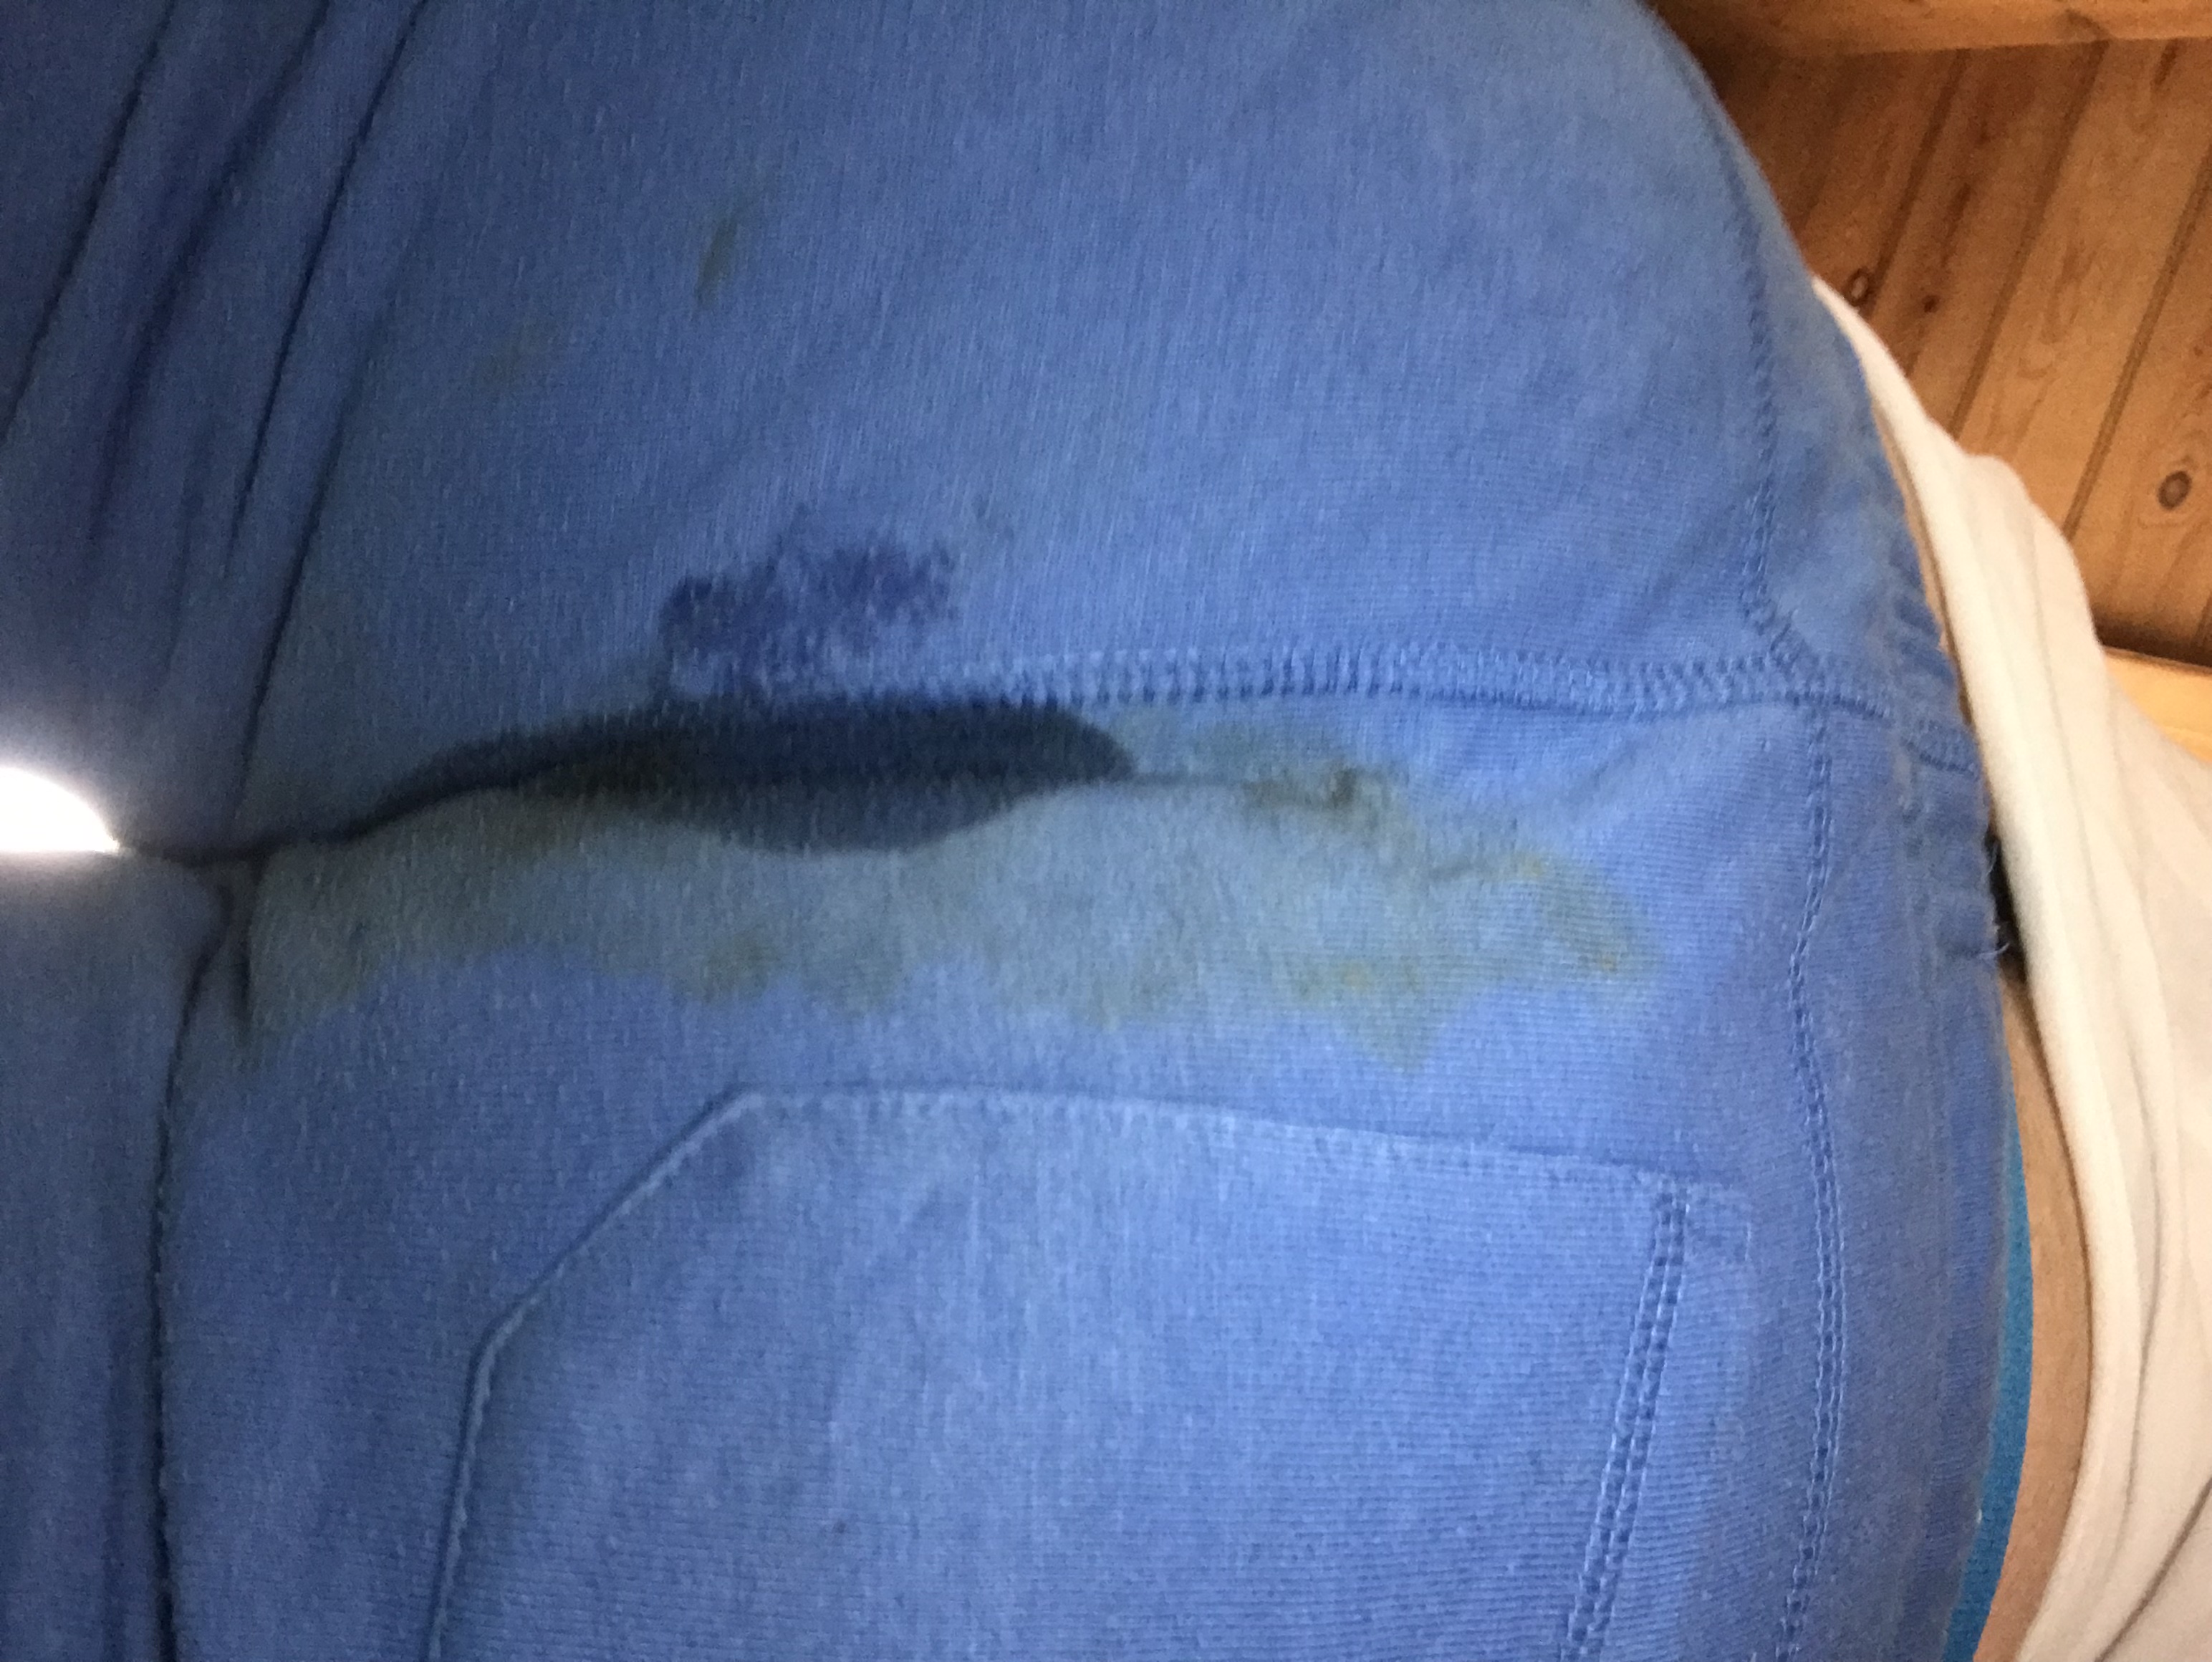 Trans girl has a wet sloppy accident in pants!